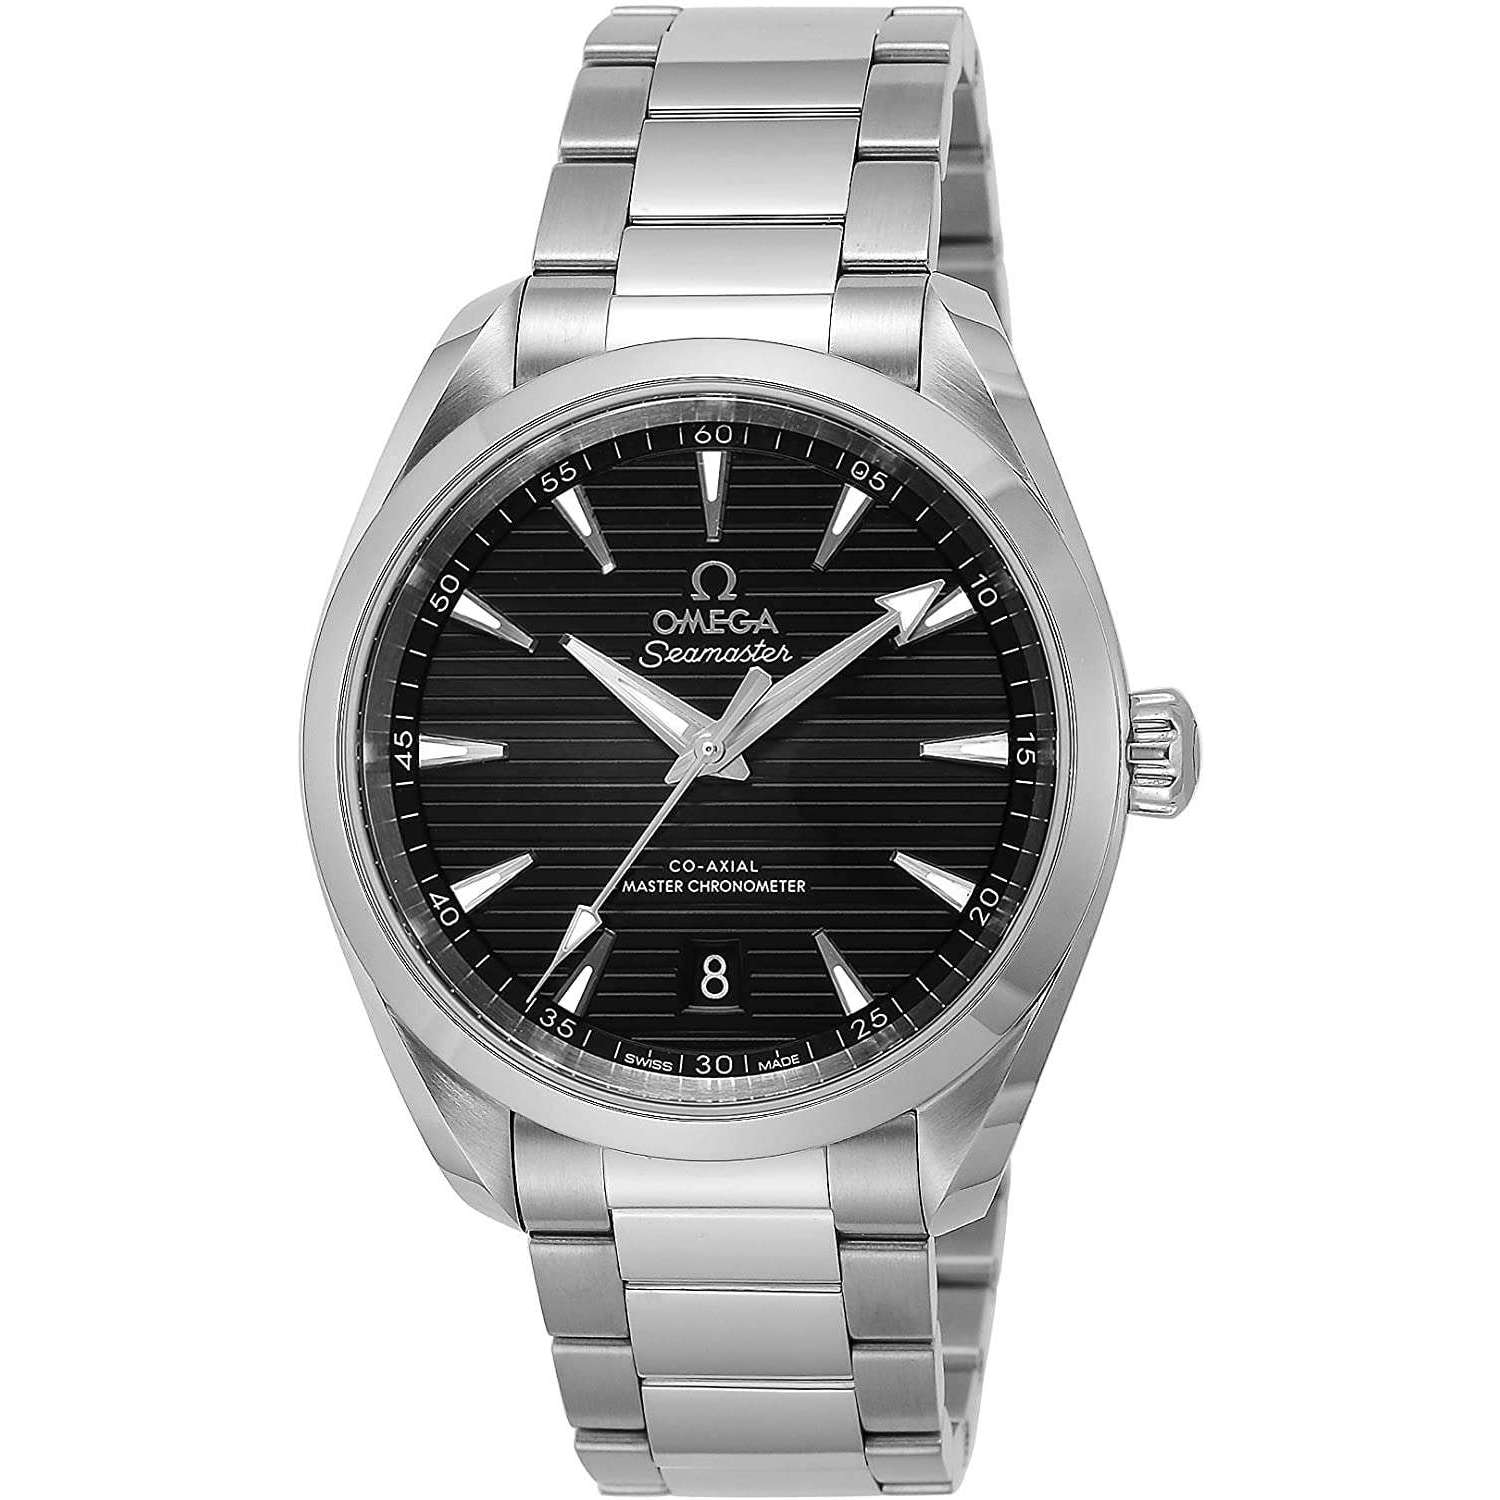 ROOK JAPAN:OMEGA SEAMASTER CO-AXIAL MASTER CHRONOMETER 37 MM MEN WATCH 220.10.38.20.01.001,Luxury Watch,Omega